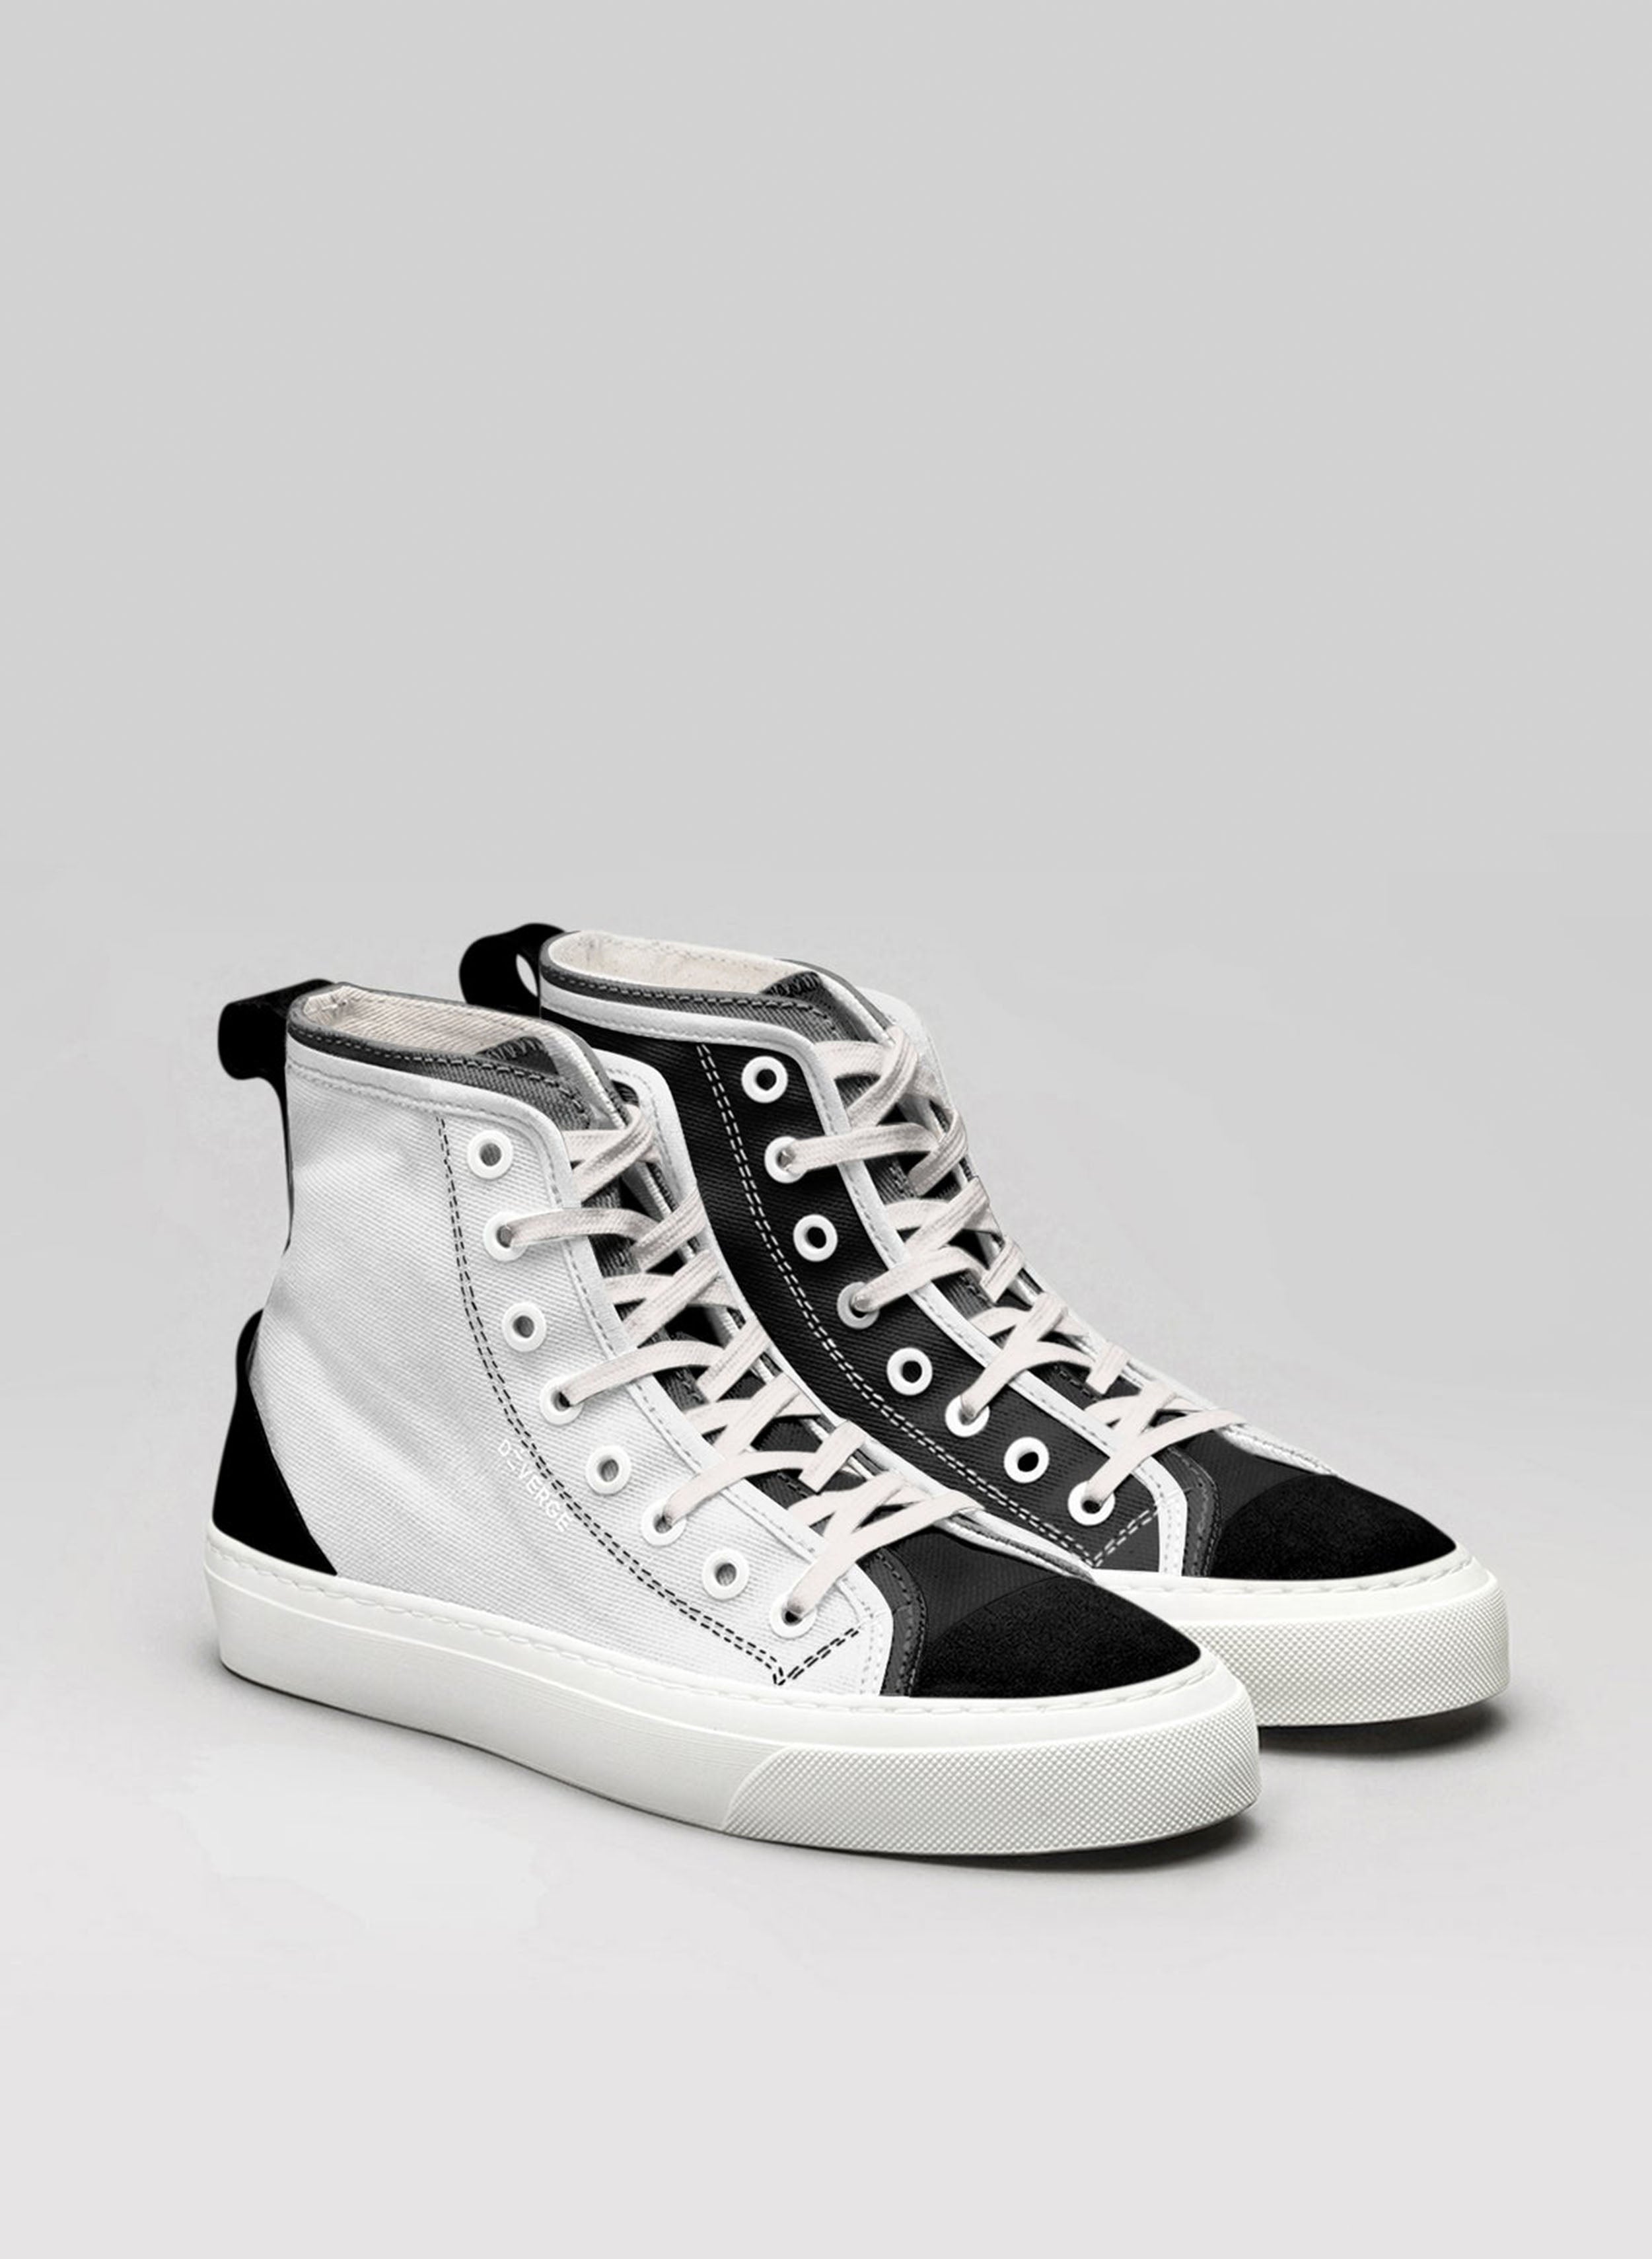 A pair of white and black high top sneakers, showcasing custom shoes by Diverge.